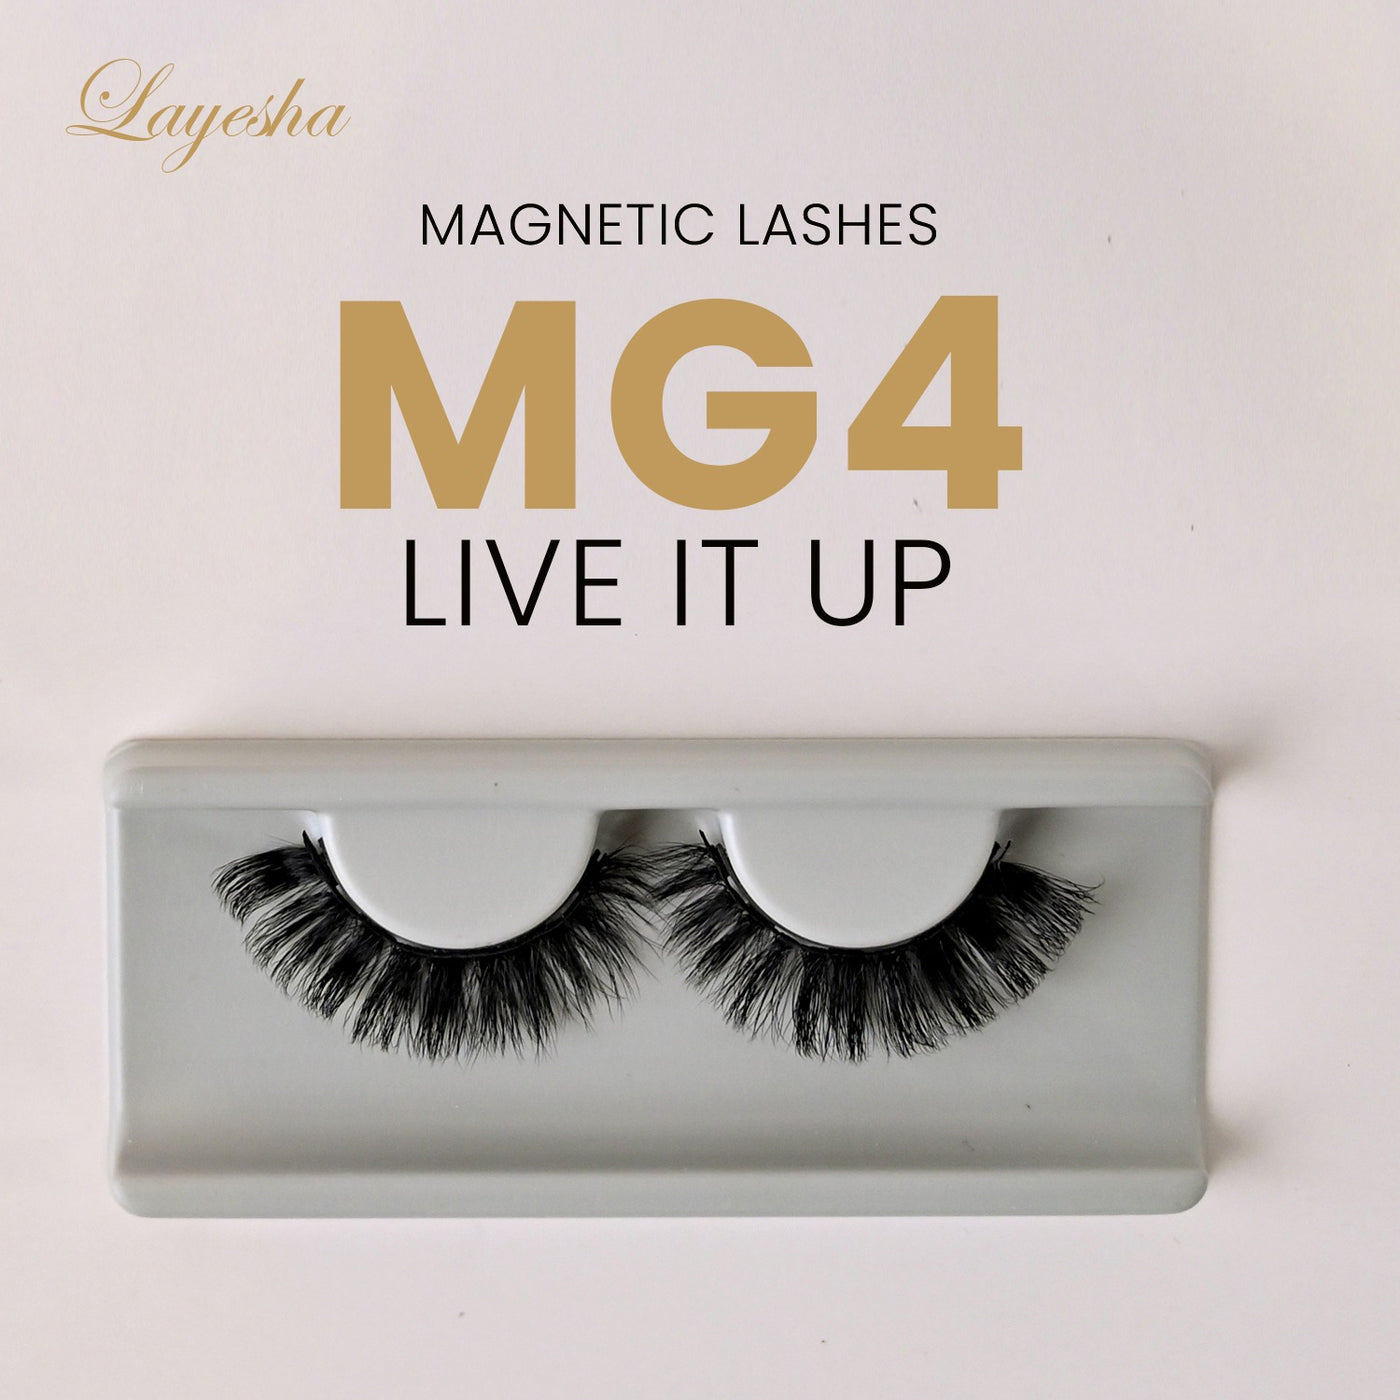 MG 4 LIVE IT UP (Magnetic Lashes)